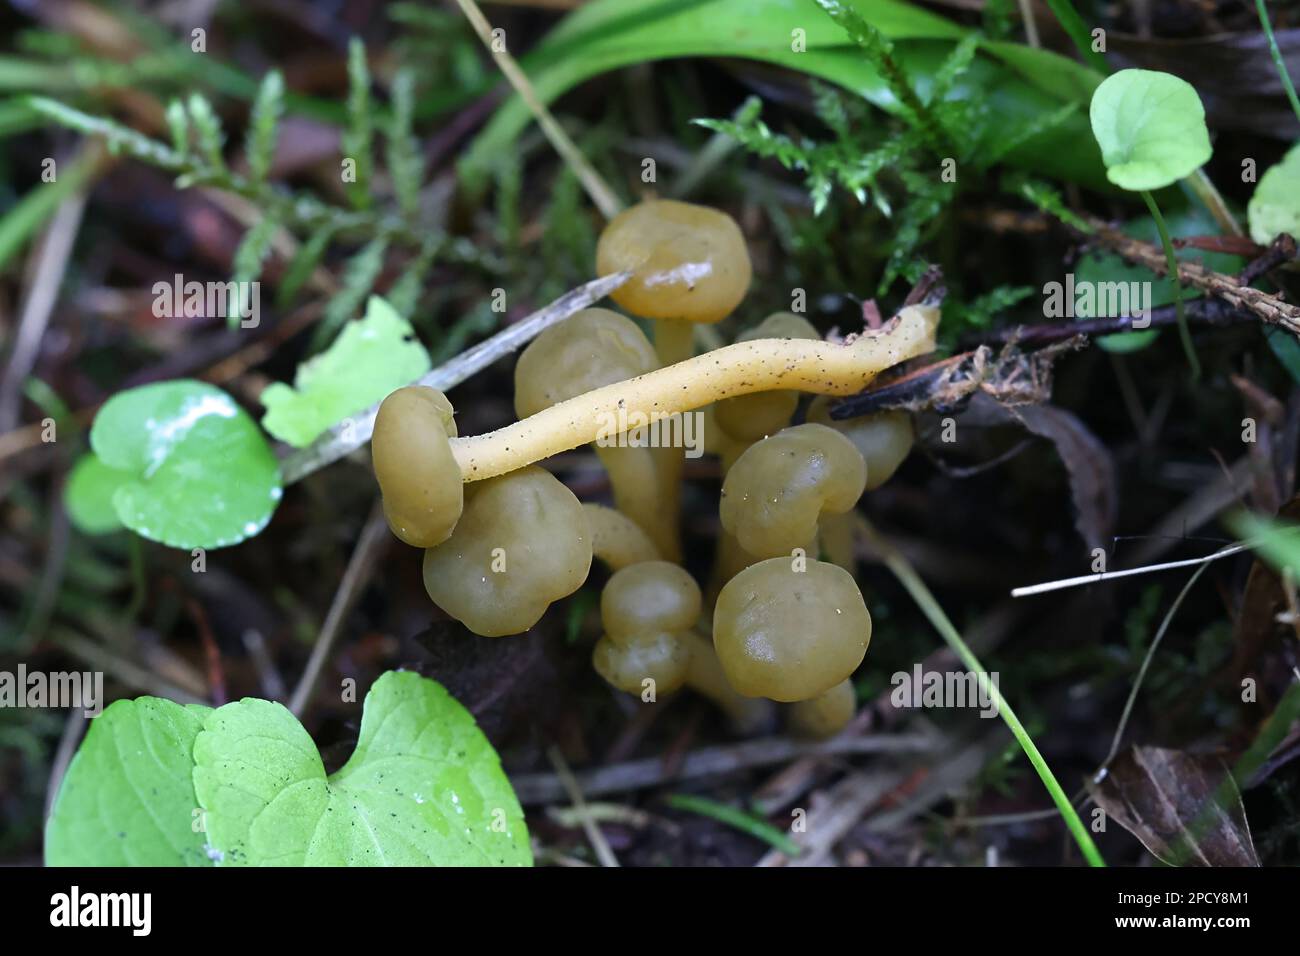 Leotia lubrica, commonly known as jelly baby or jellybaby, wild fungus ...